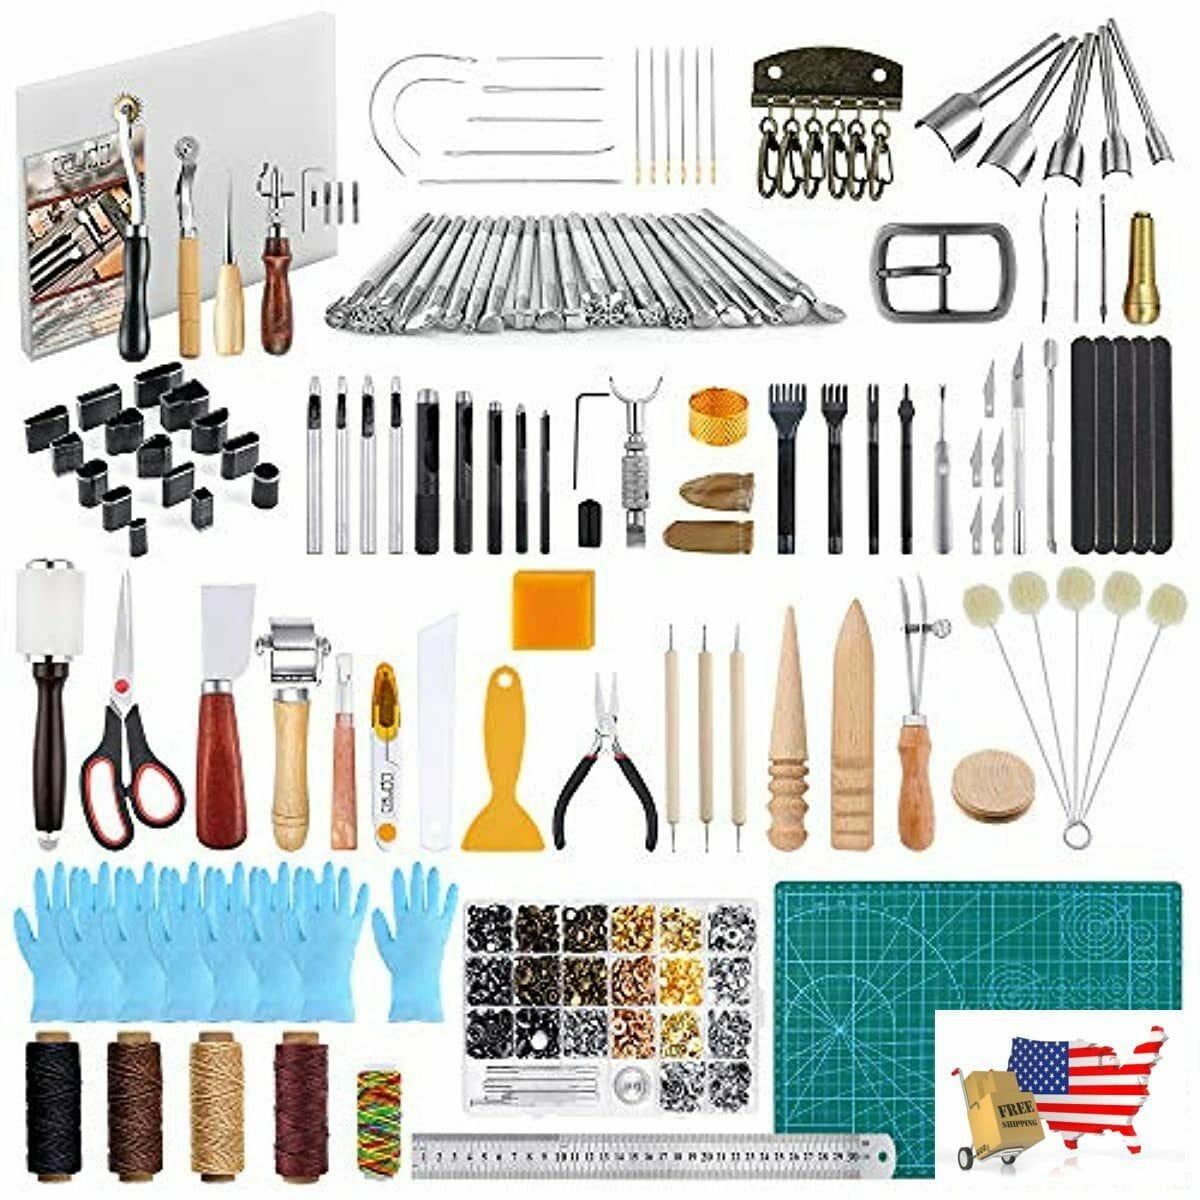 Leather Craft Kits, Leather Working Tools and Supplies, Leather Rivets and  Snaps Set, Leather Stamping Tools, Leather Crafting Tools Kit for Beginners